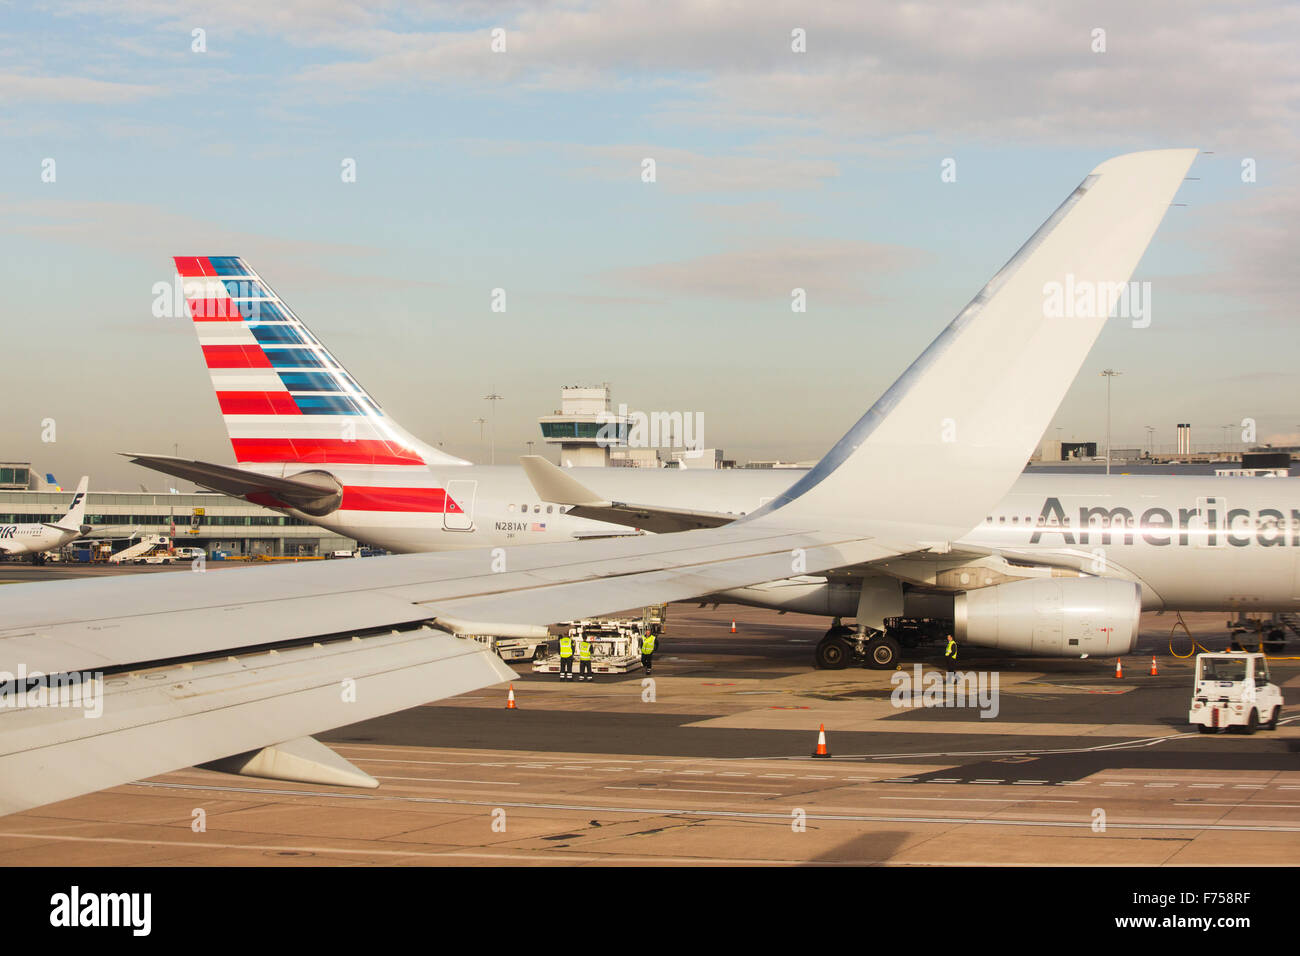 An American Airlines jet leaving Manchester airport, UK. Stock Photo